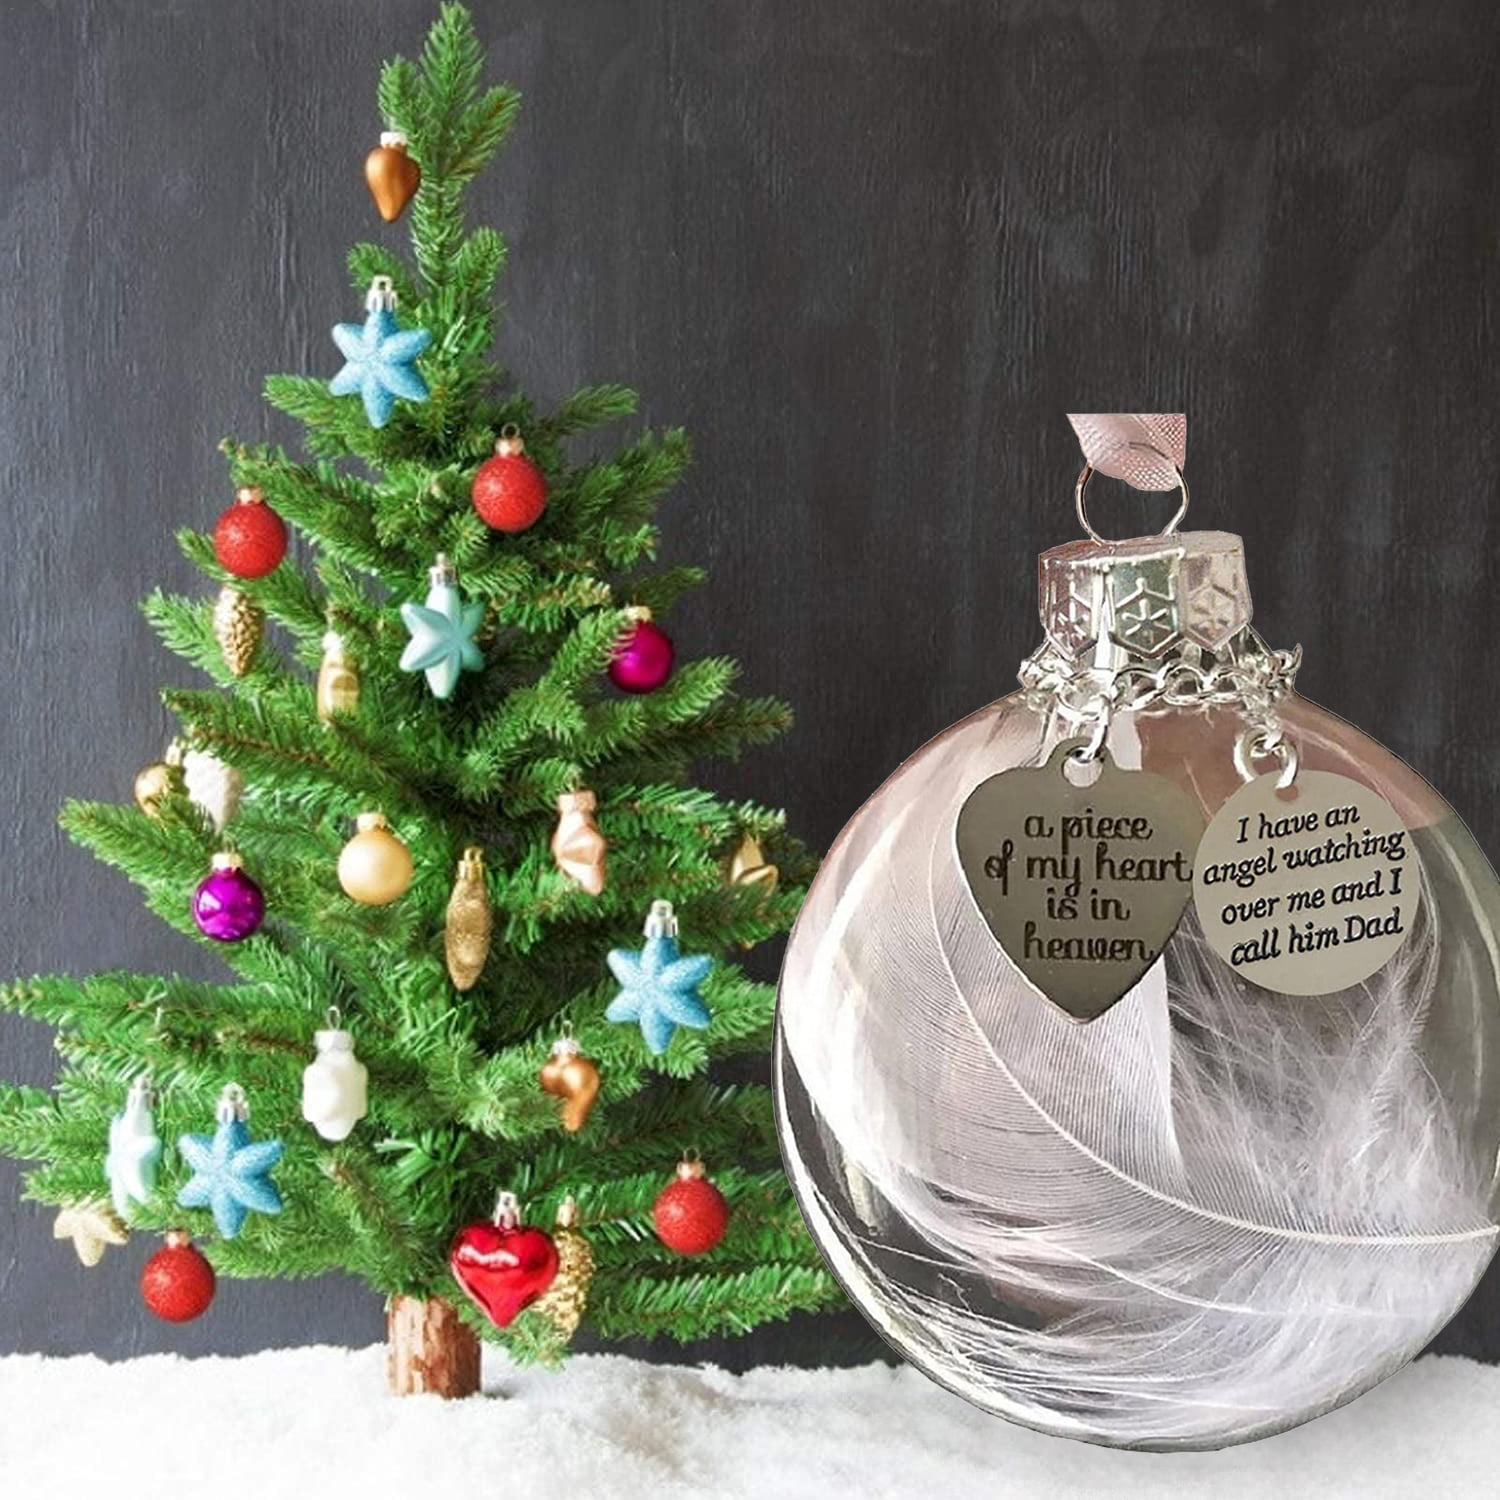 Memorial Ornaments for Loss of Loved One Personalize,A Piece of My Heart is in Heaven Memorial Ornament,Christmas Tree Hanging Decorations Xmas Gifts 001-Son Christmas Ornaments Clear Heart Ball